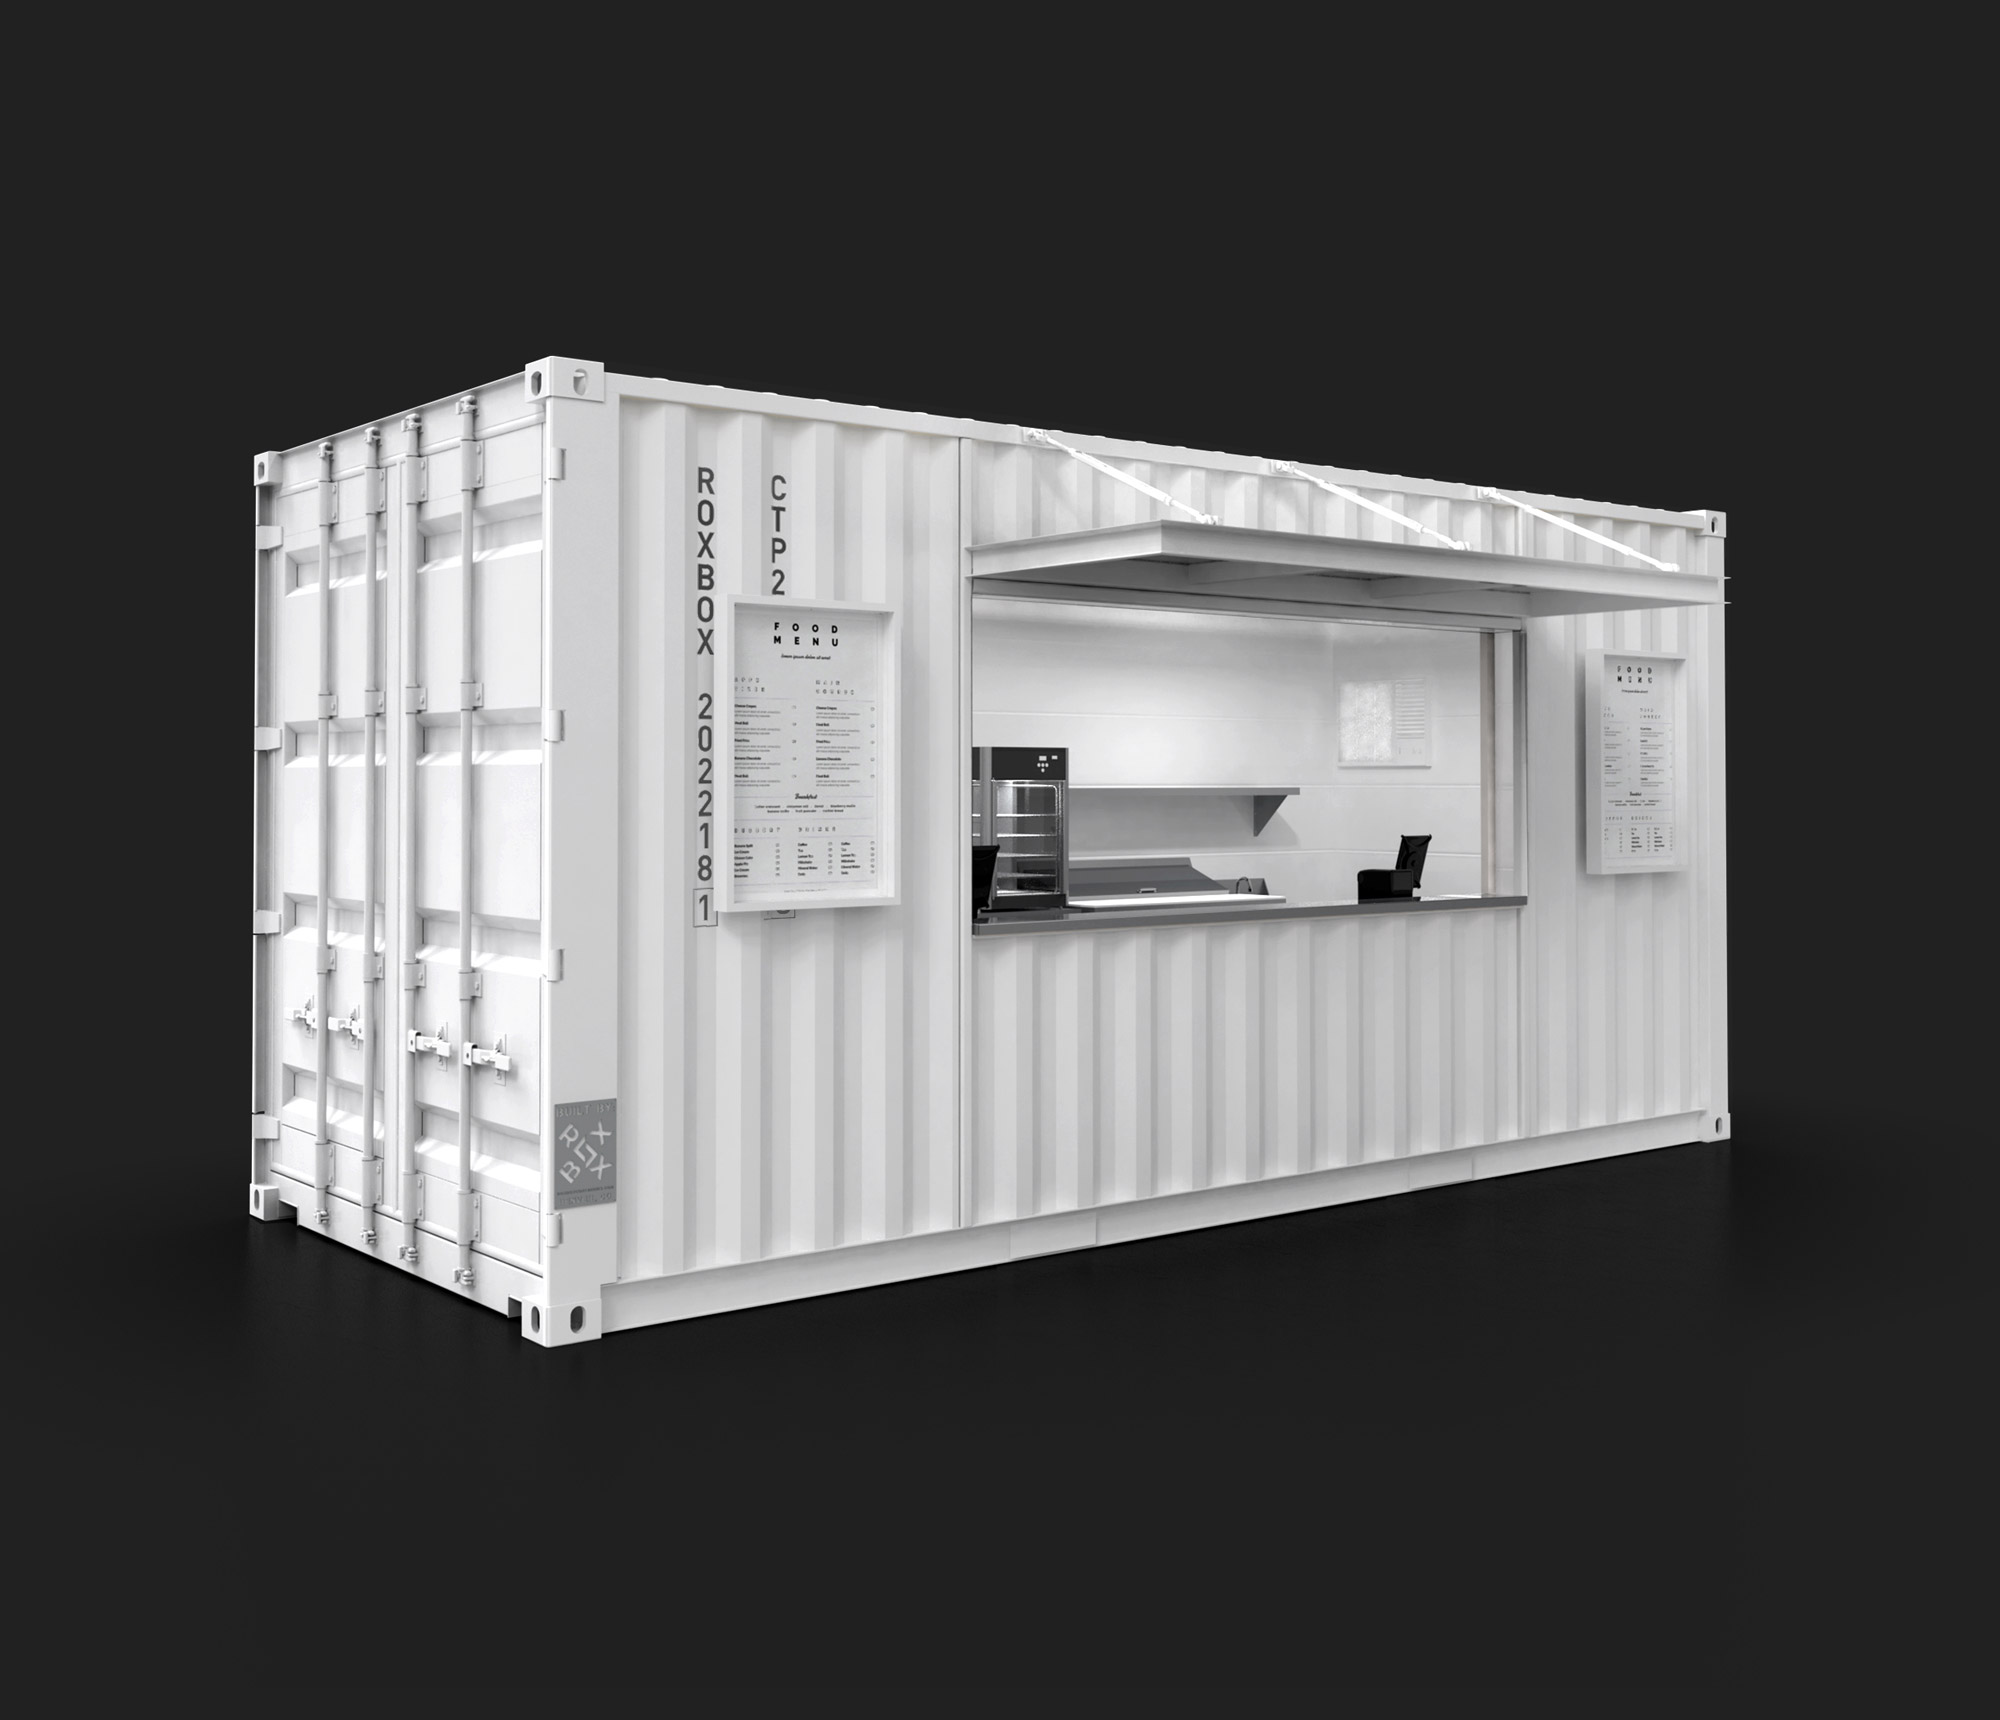 https://www.roxboxcontainers.com/wp-content/uploads/2022/11/20-Canteen-Pro-for-Web-4.jpg